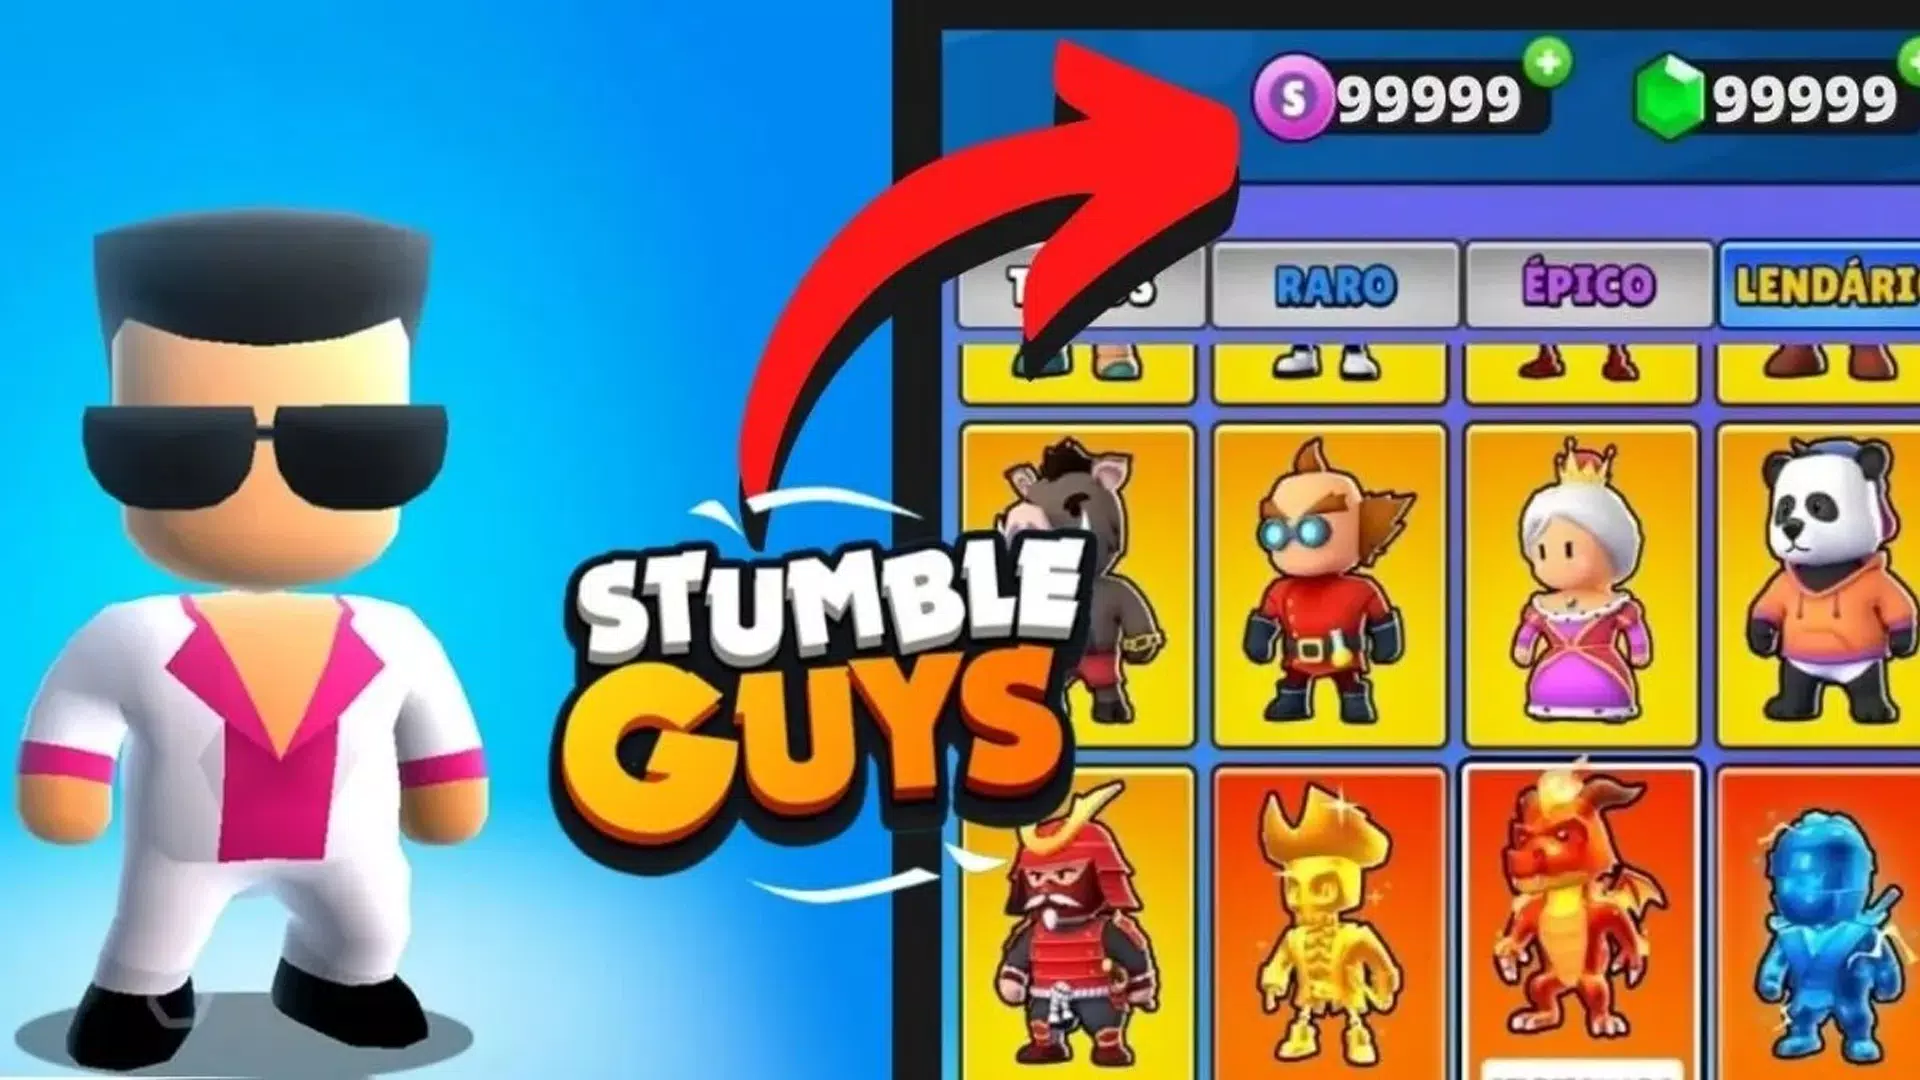 Mobile - Stumble Guys - Skins - The Spriters Resource